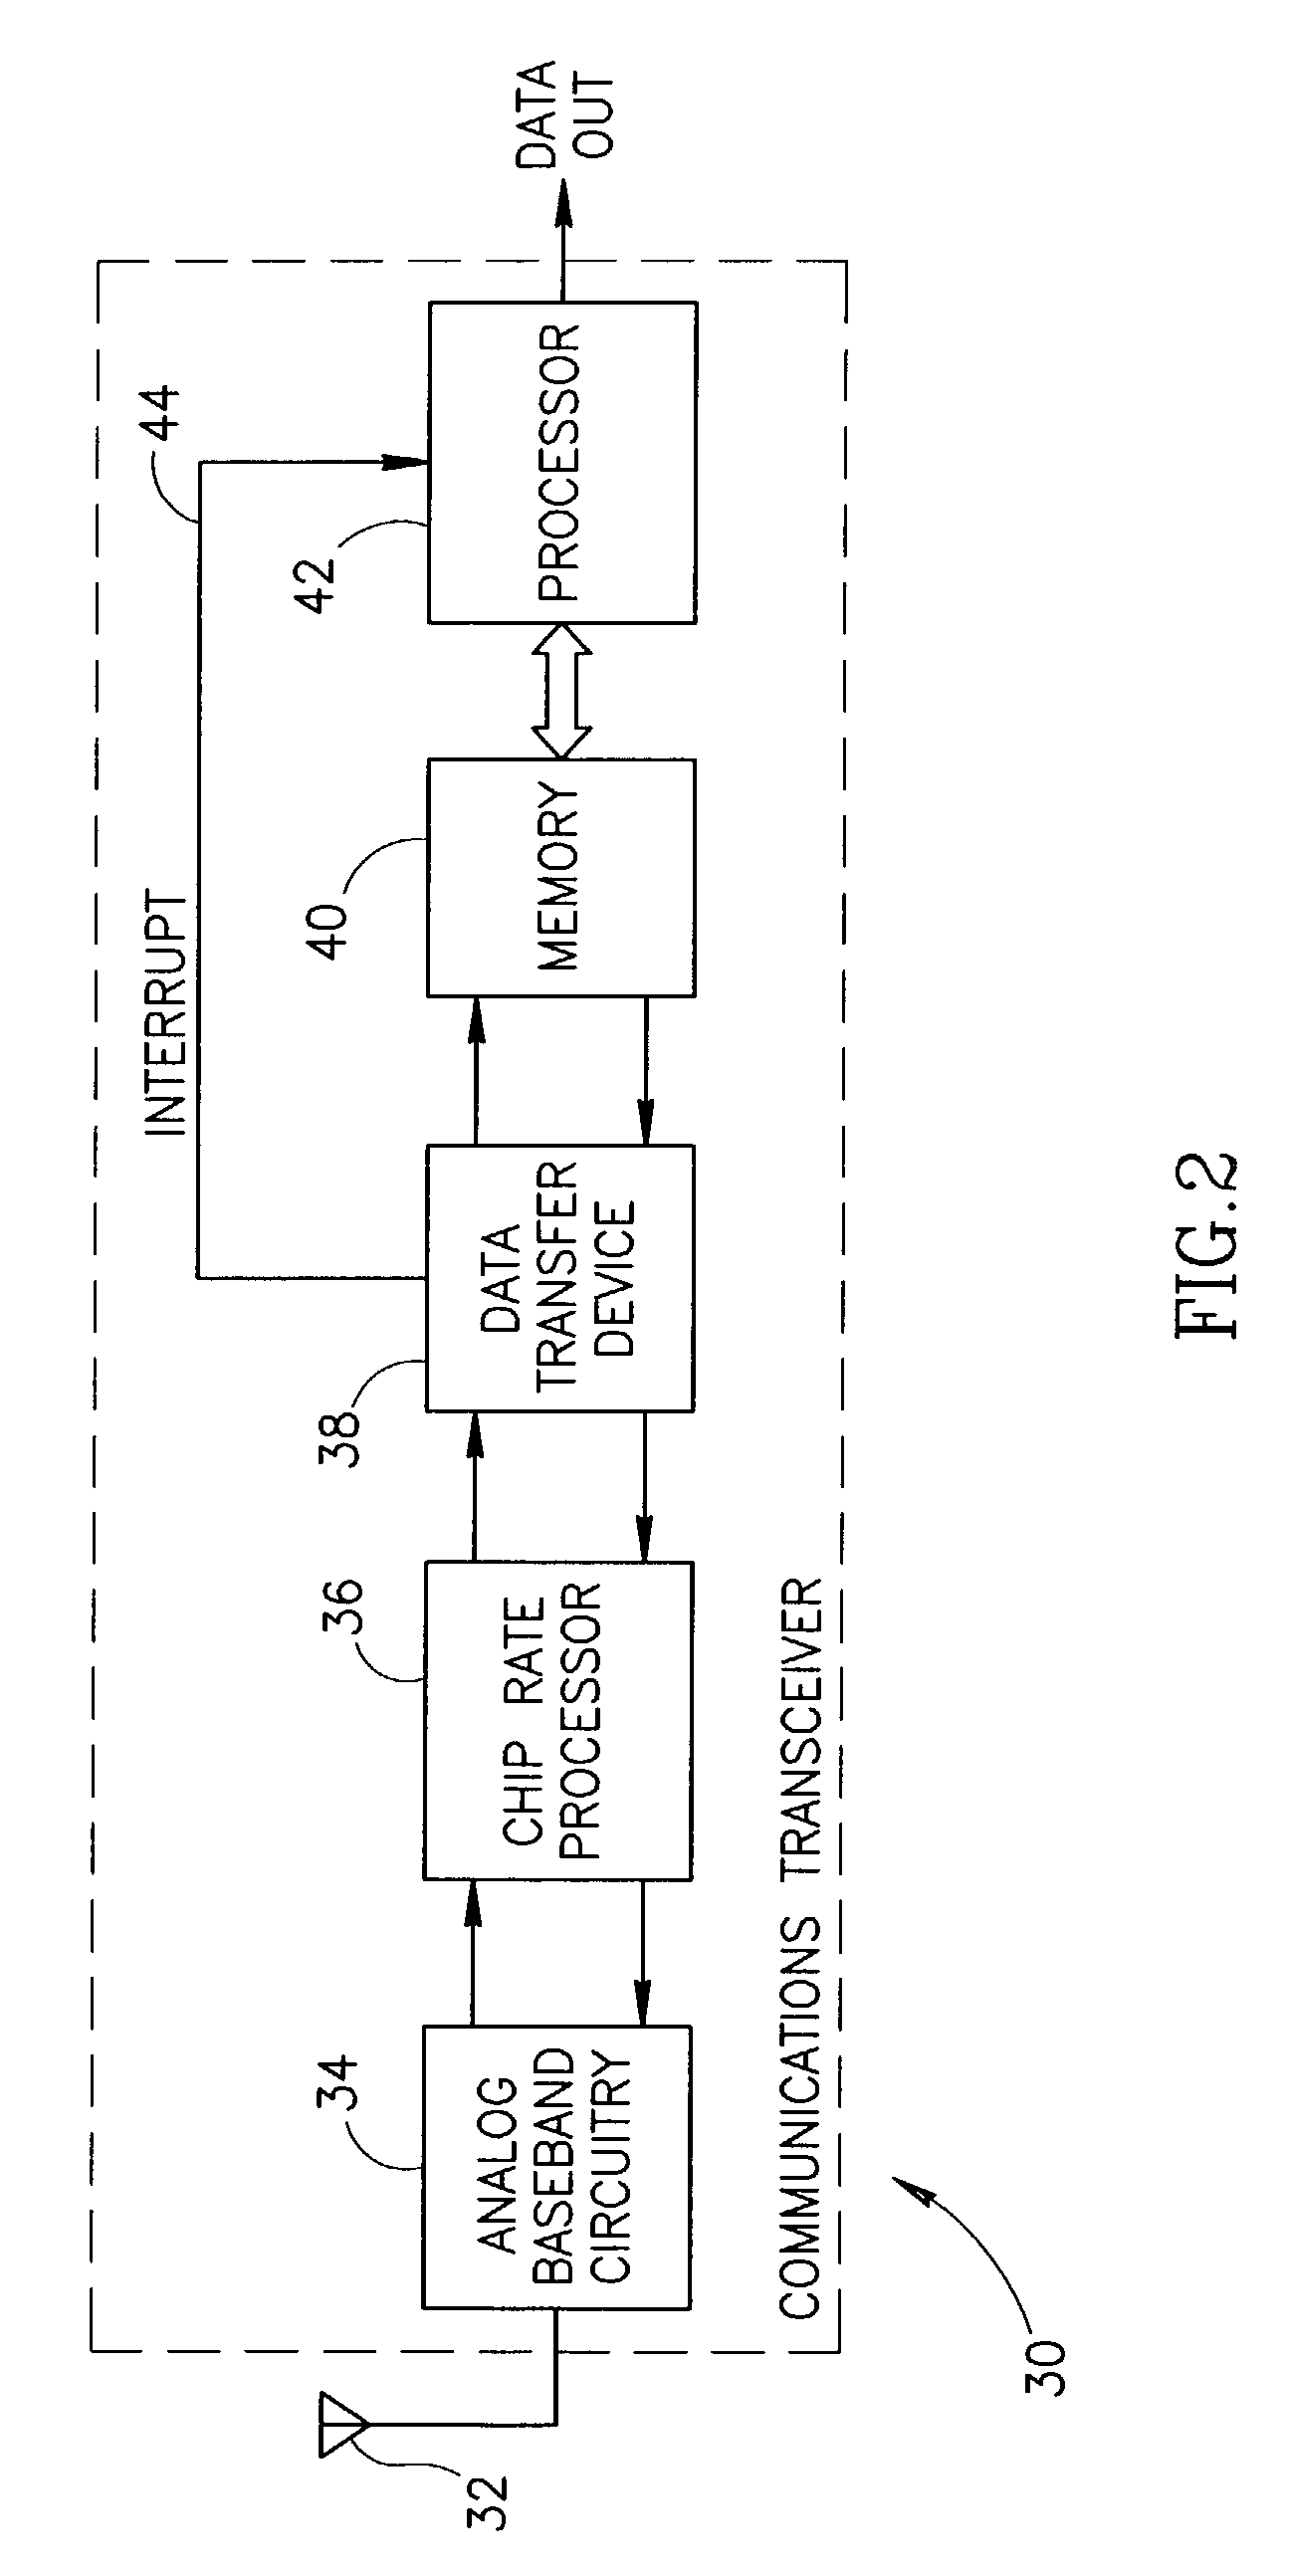 Information transfer and interrupt event scheduling scheme for a communications transceiver incorporating multiple processing elements